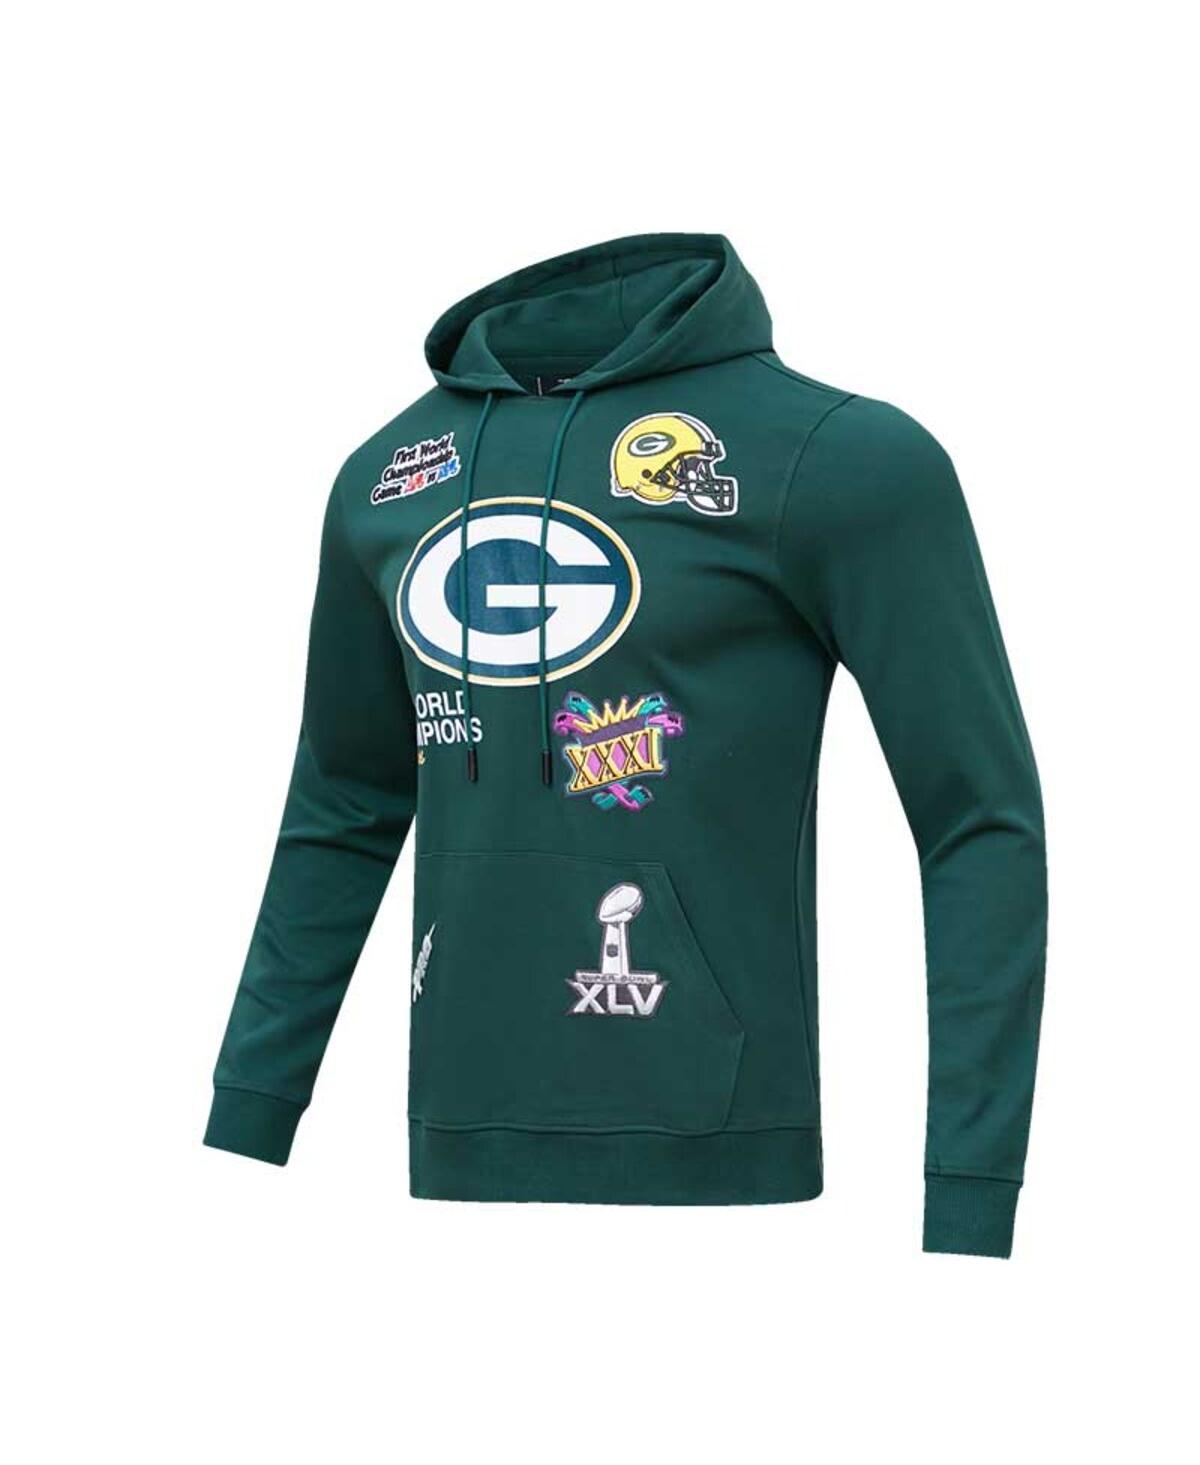 Shop Pro Standard Men's  Green Green Bay Packers 4x Super Bowl Champions Pullover Hoodie